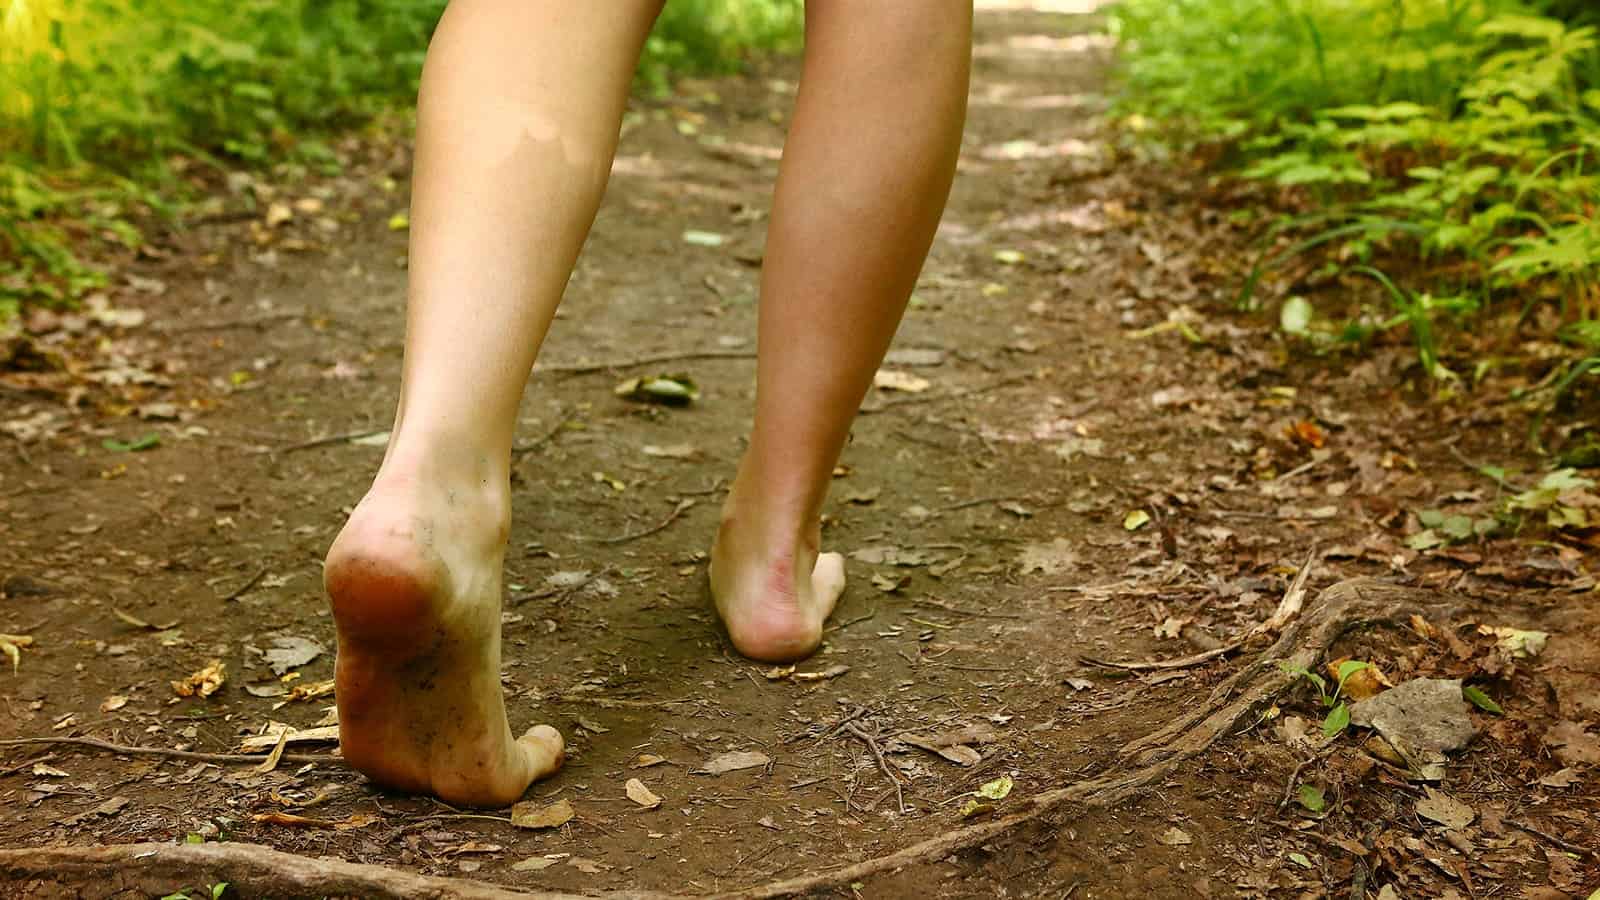 🚿 From A+ to F, Where Do You Rank in Terms of Hygiene? Scientists Explain What Happens To Your Body When You Walk Barefoot